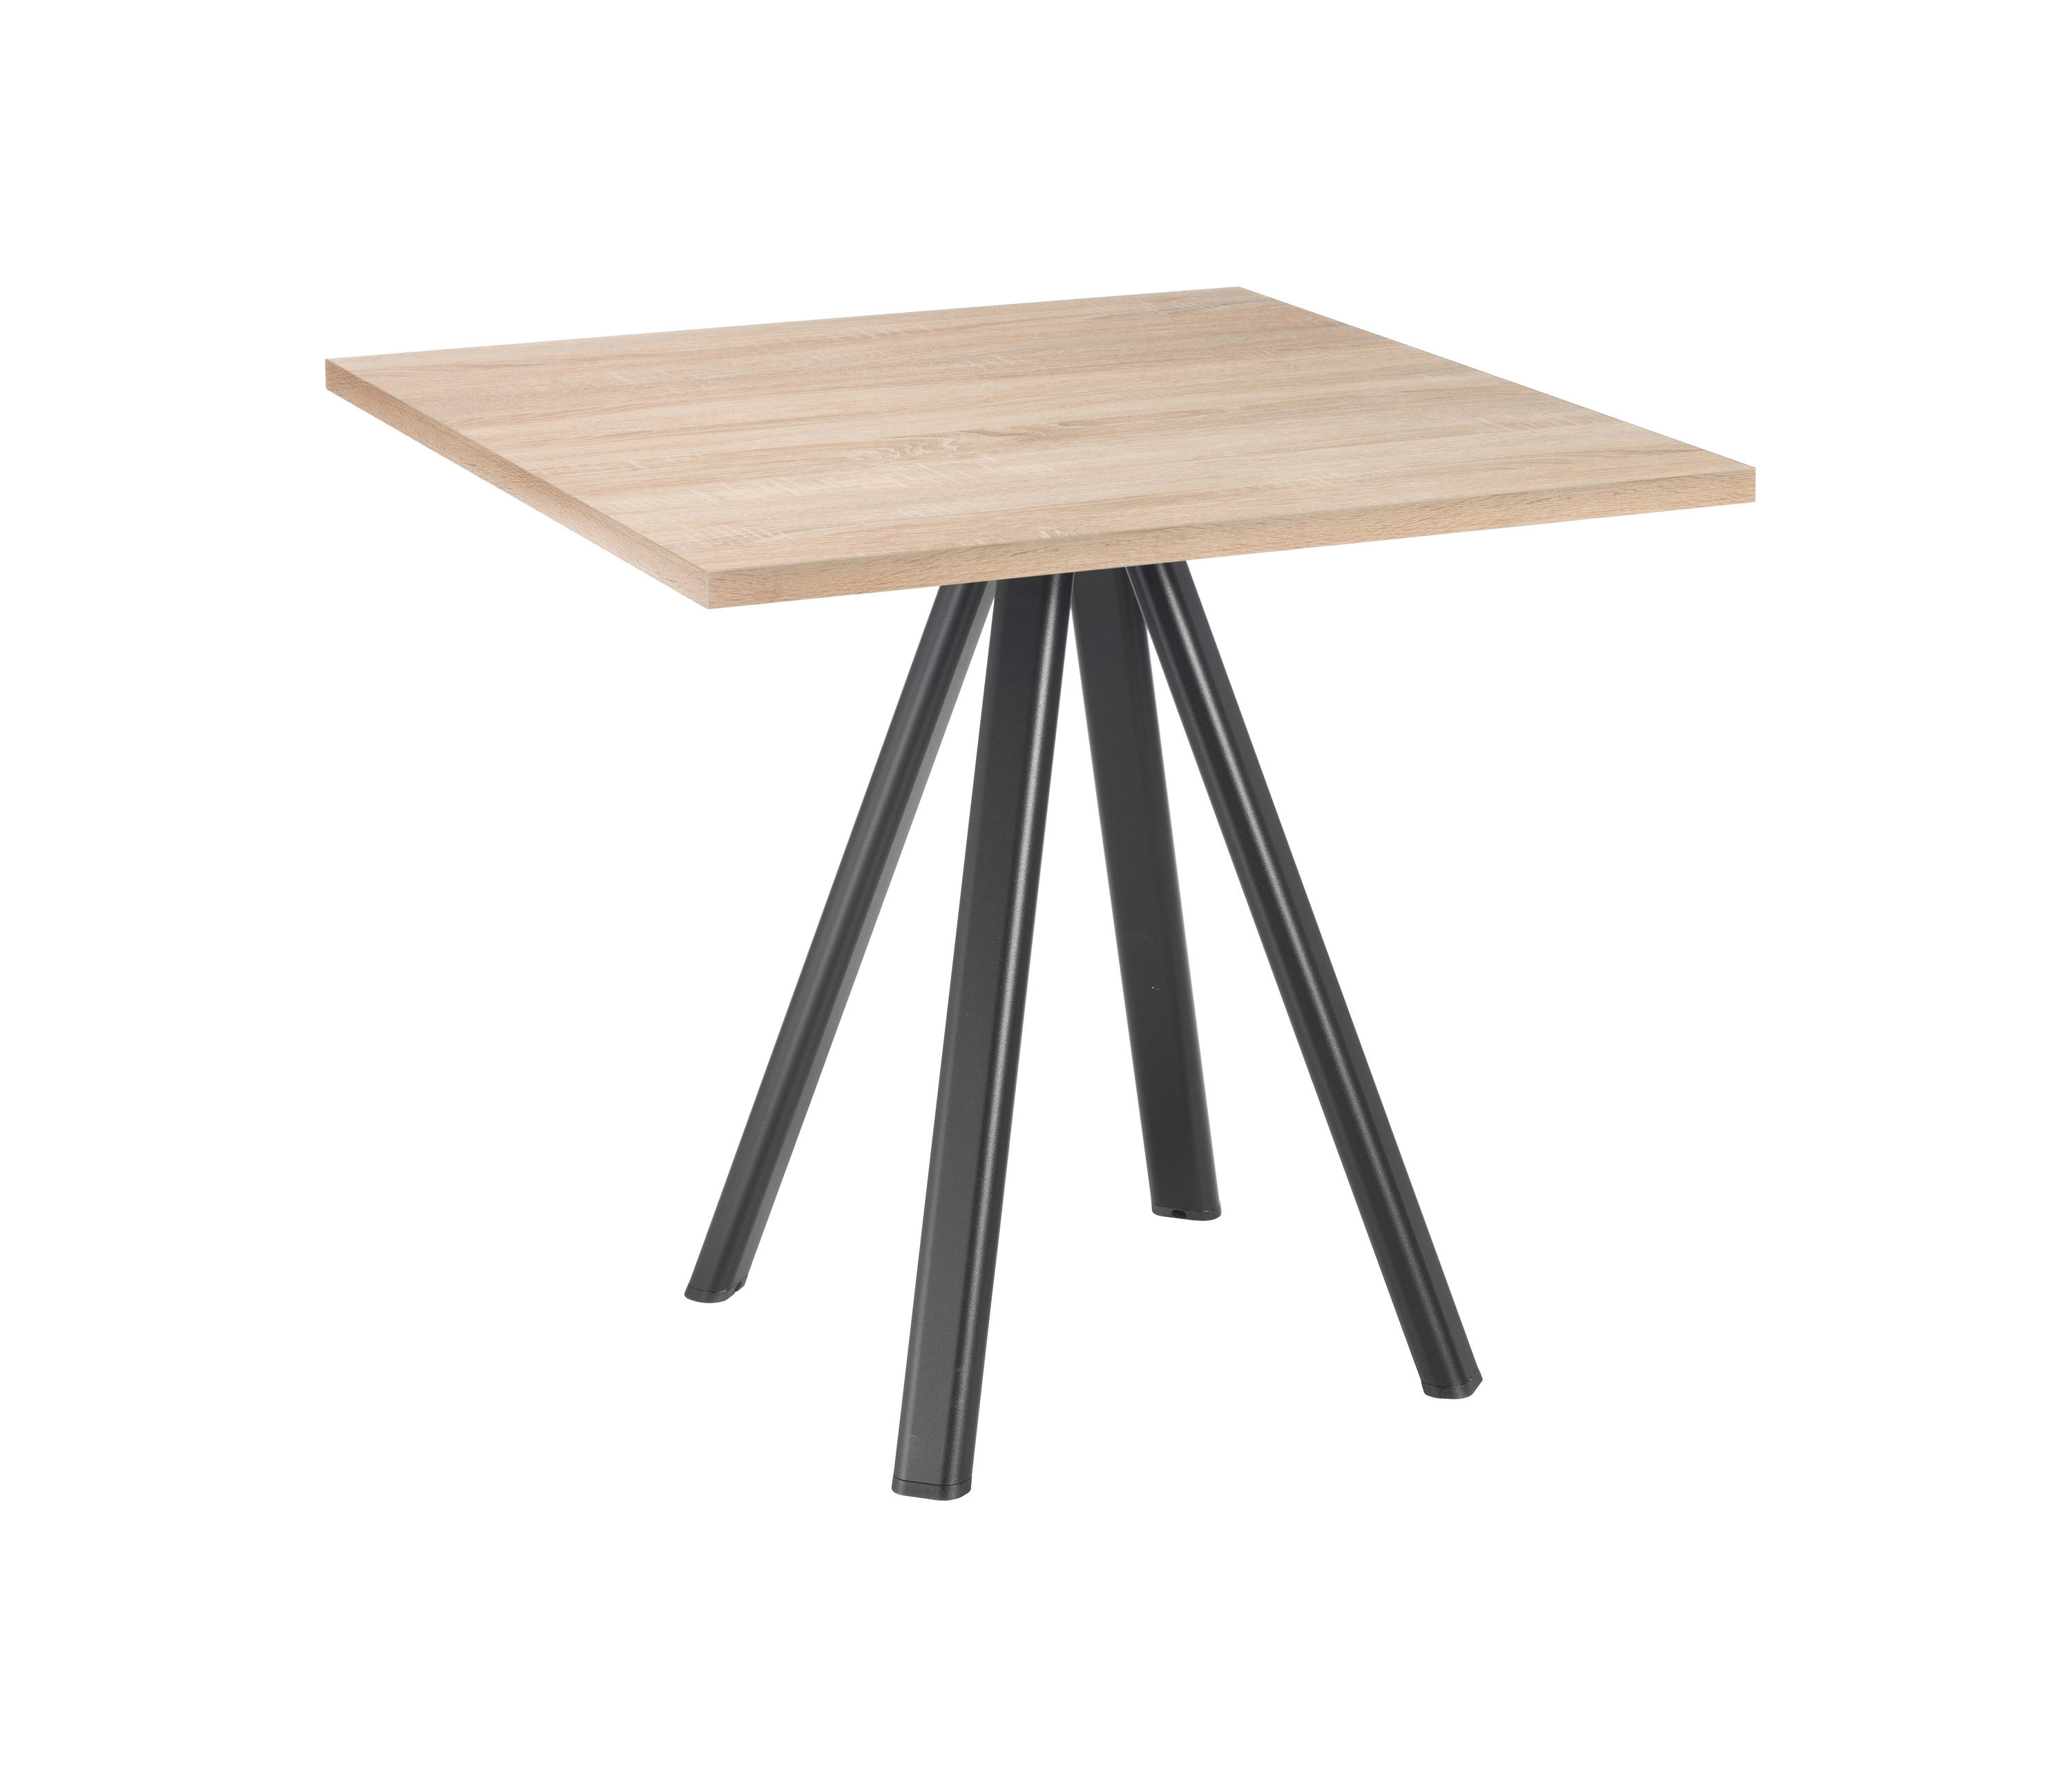 Vieques Dining Table Top 4 Guests 90x90, Kettal